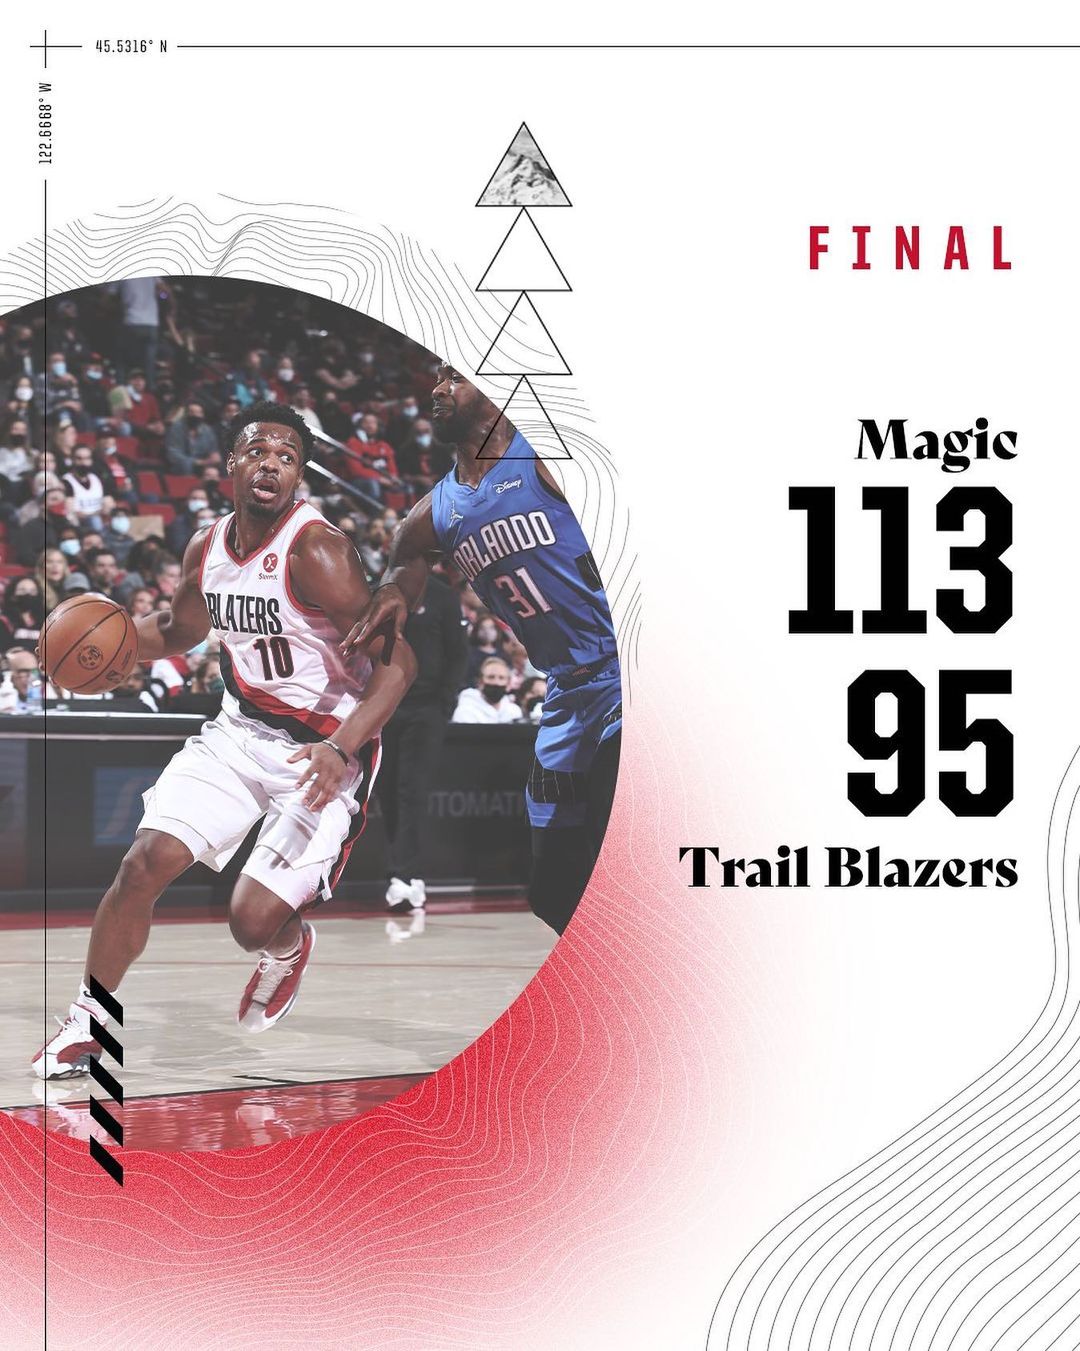 Back in 24 hours.  #RipCity...